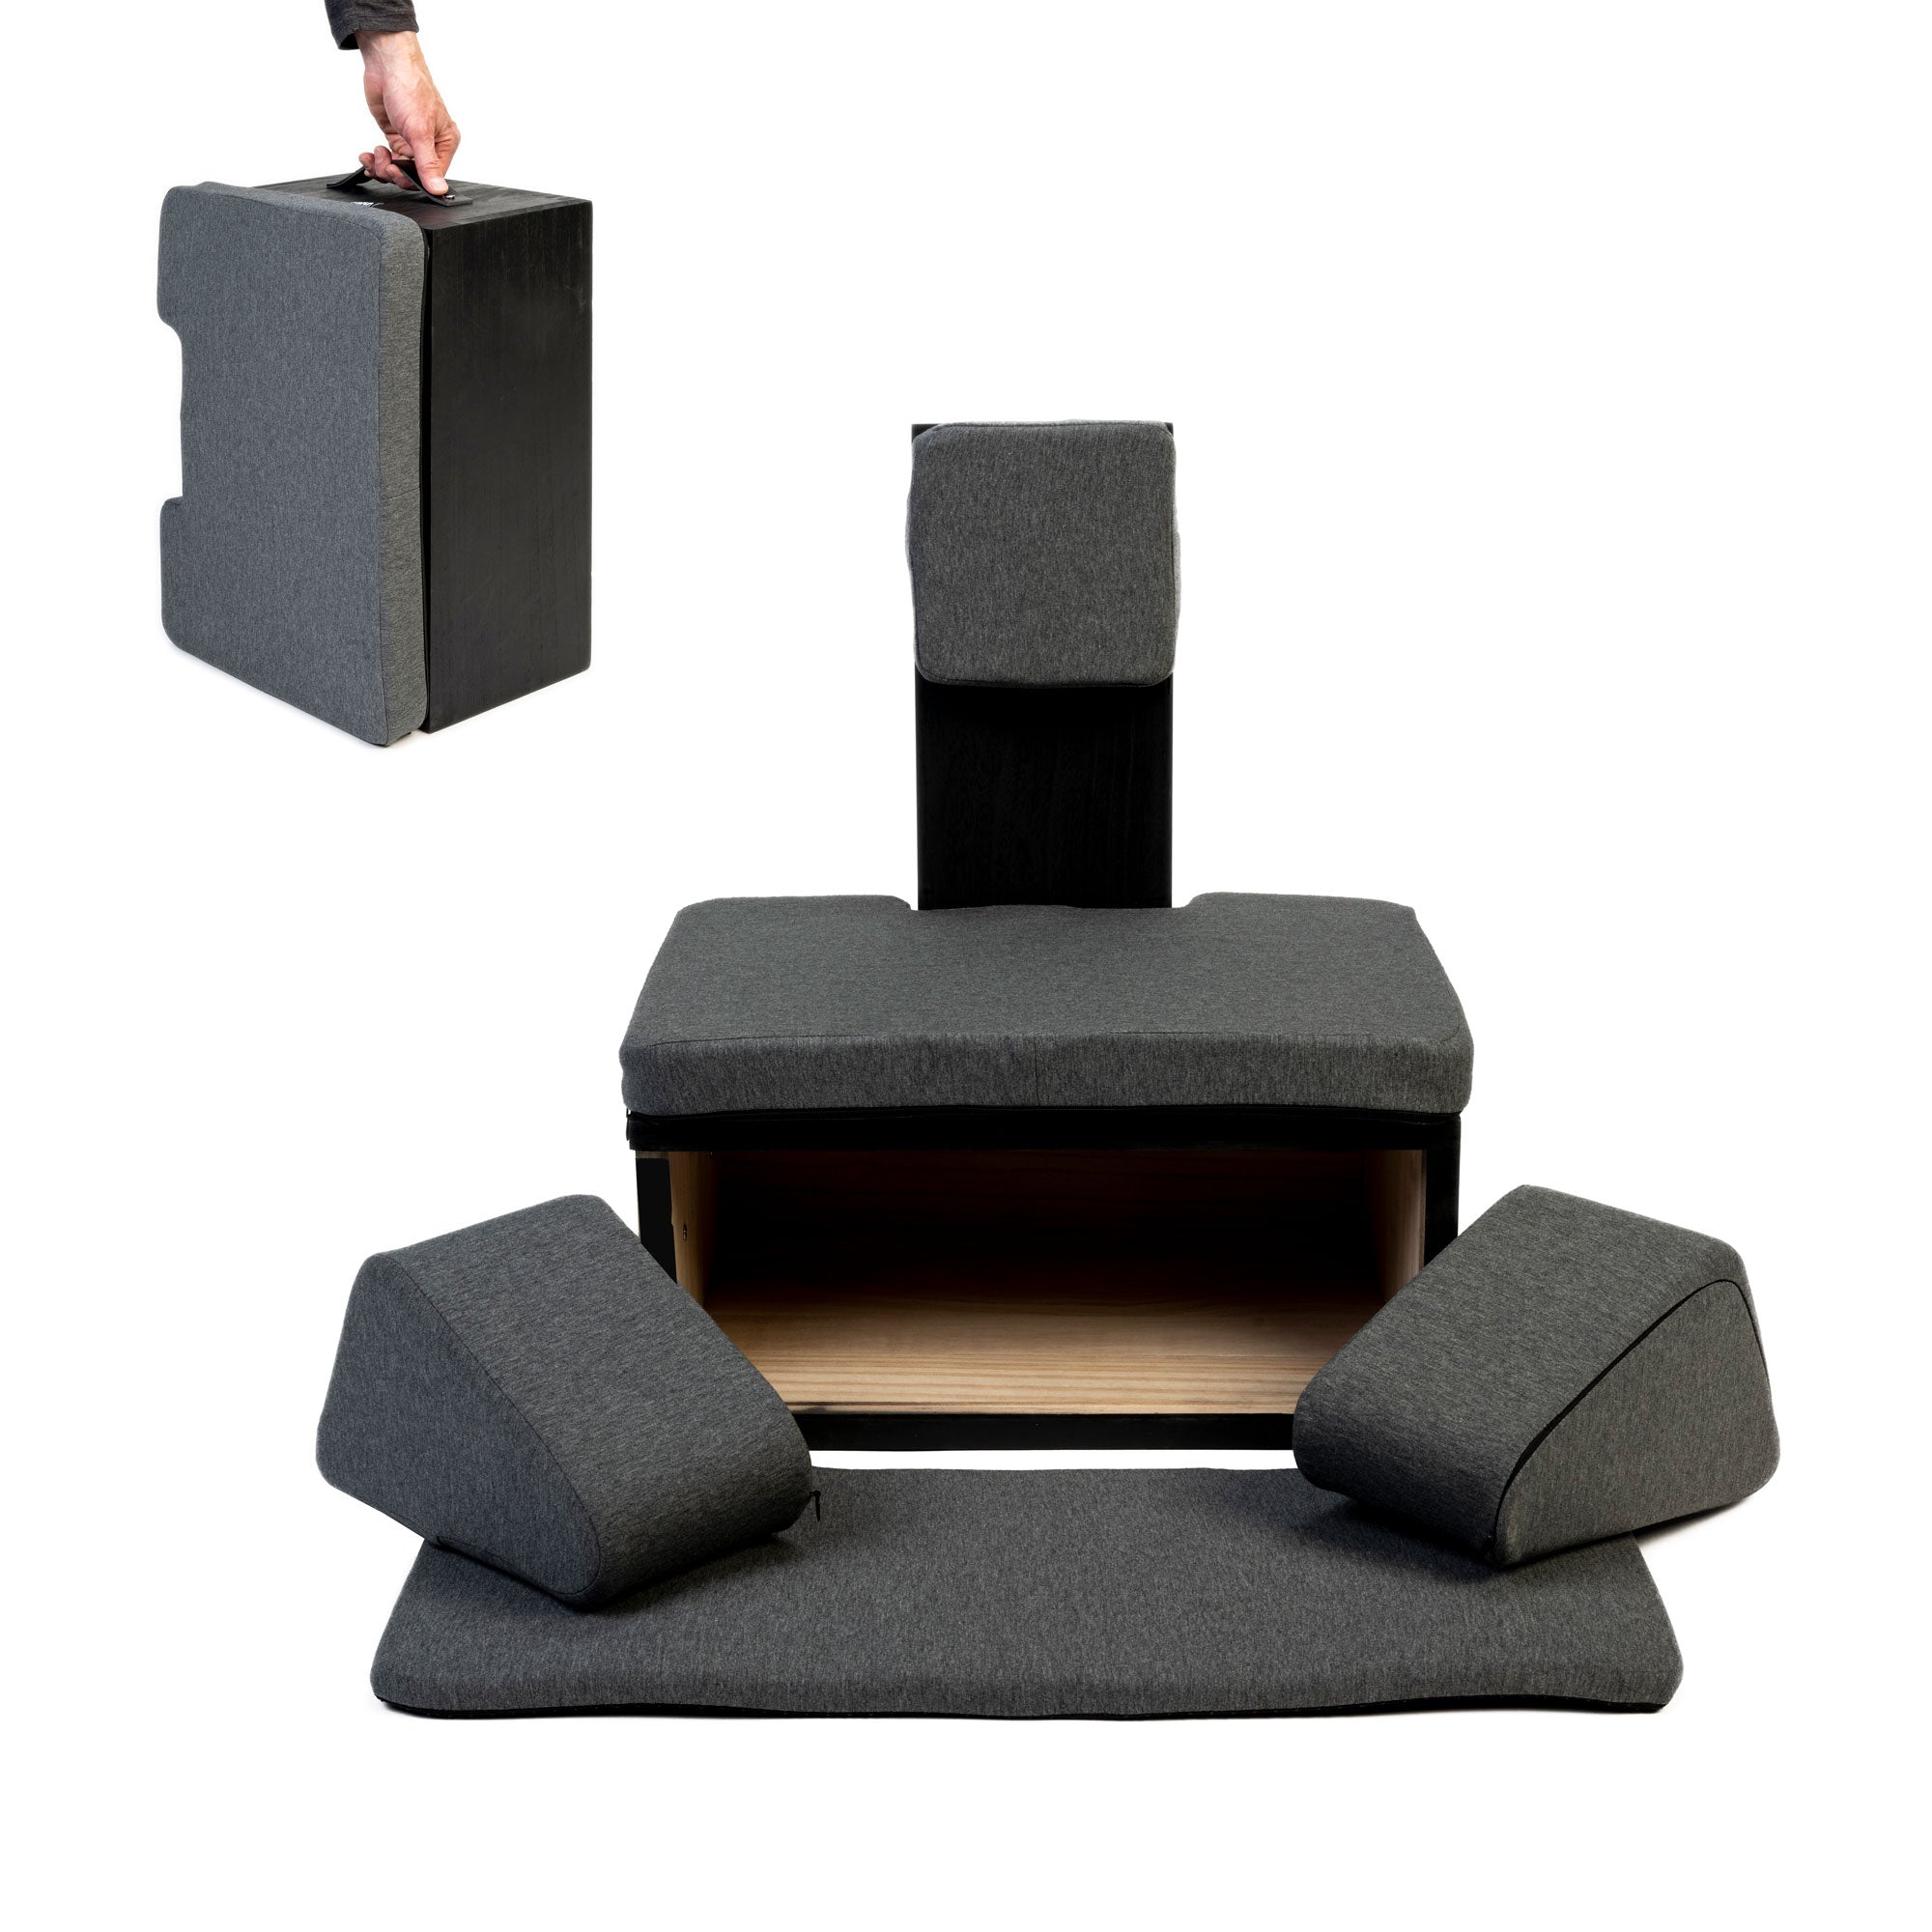 Ungloo Box - Portable Meditation Chair With Back and Hip Support